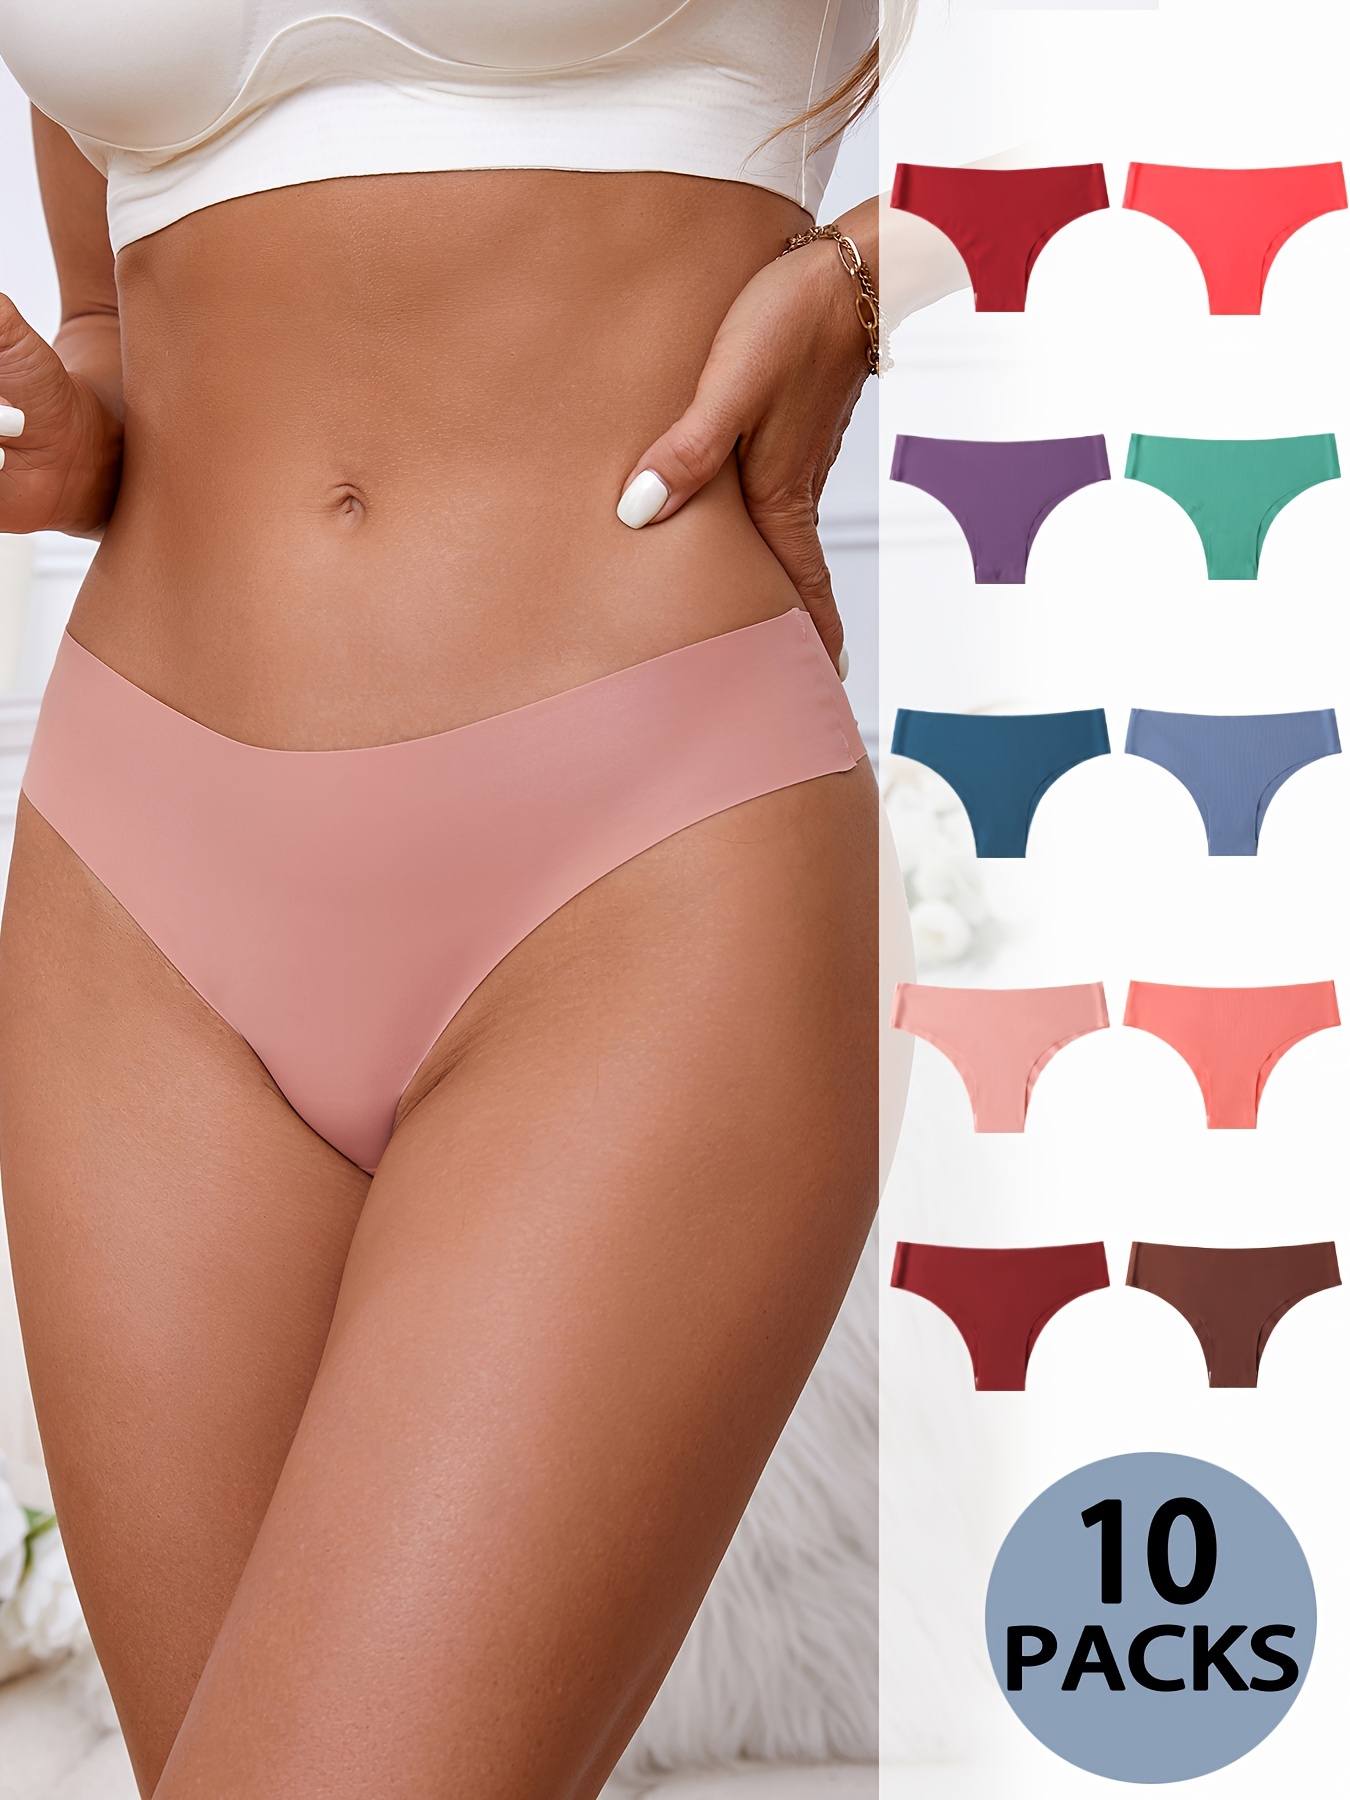 10 Seamless Solid Panties, Comfy & Breathable Stretchy Intimates Panties,  Women's Lingerie & Underwear